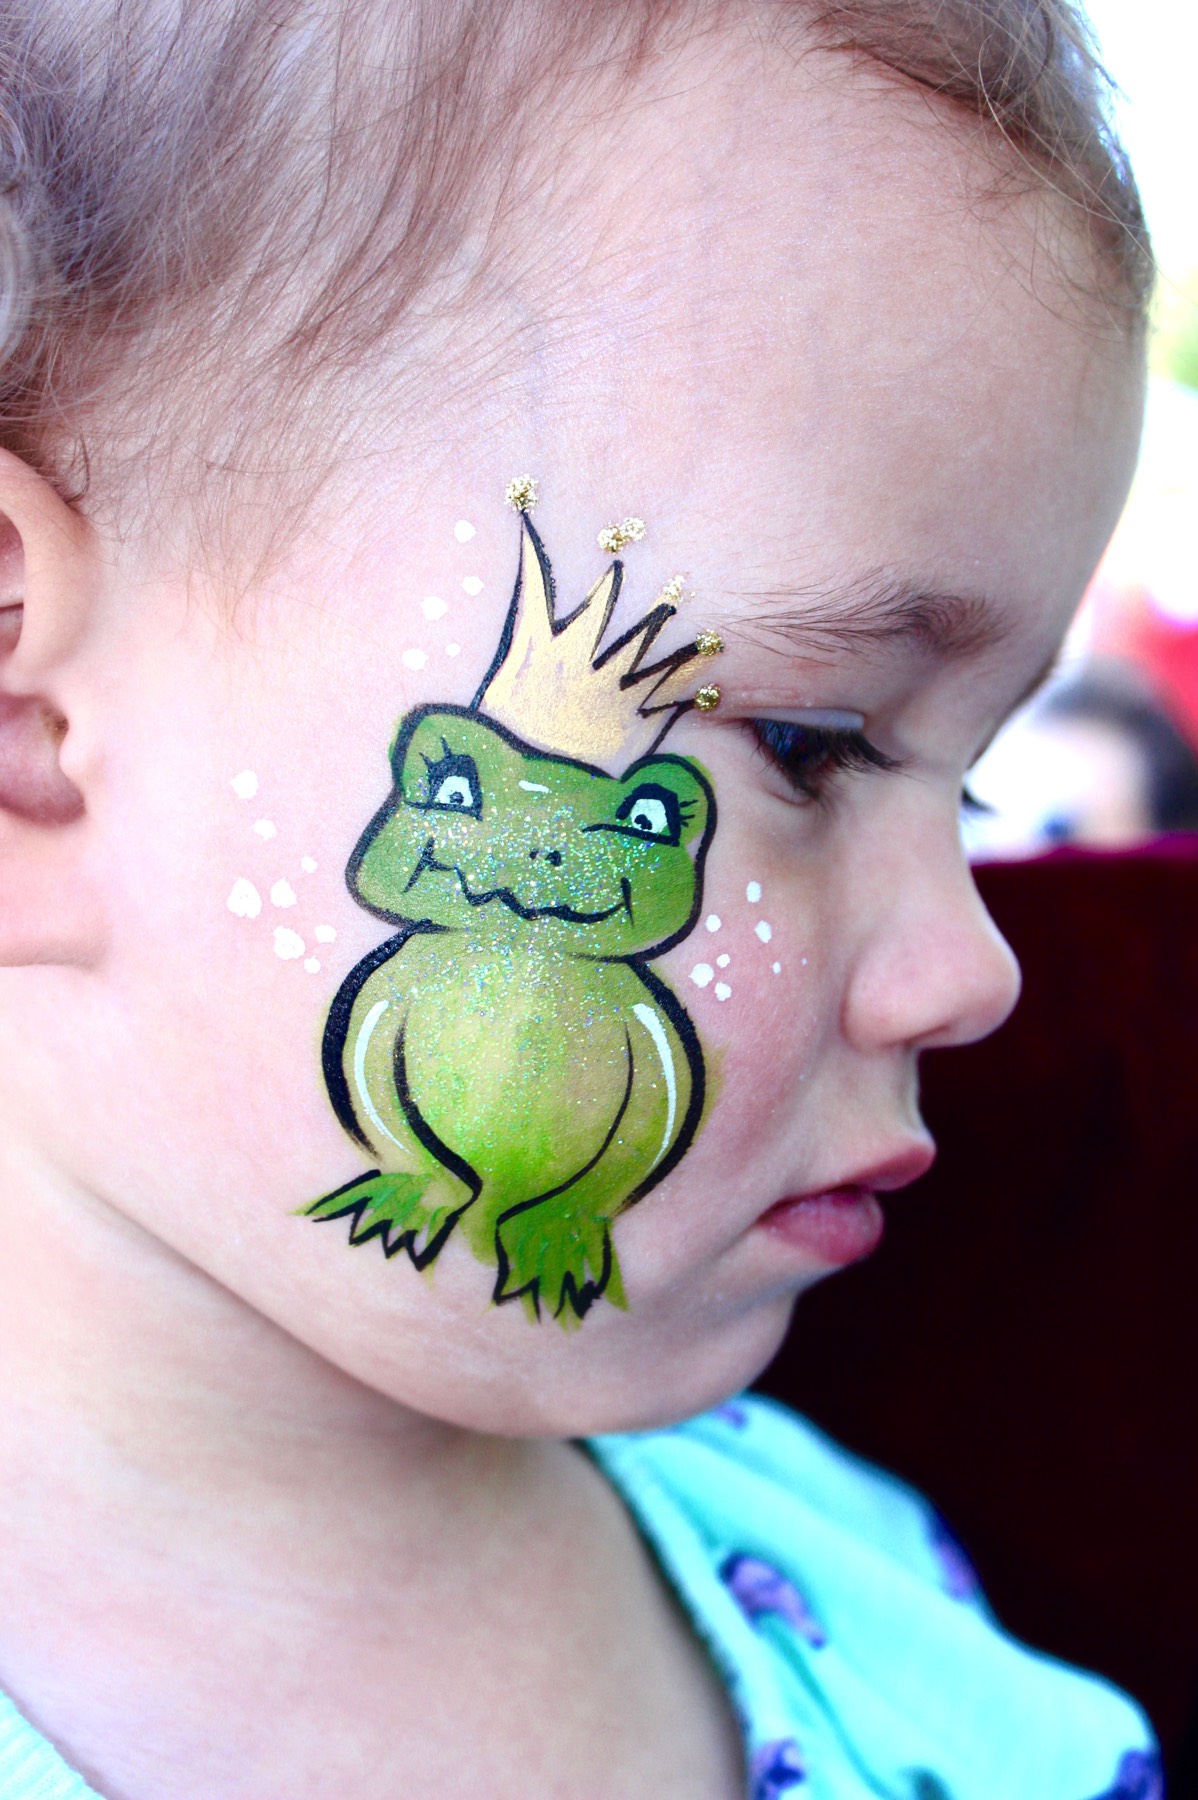 Kidzfaces - Face Painting for Kids and Grown Ups